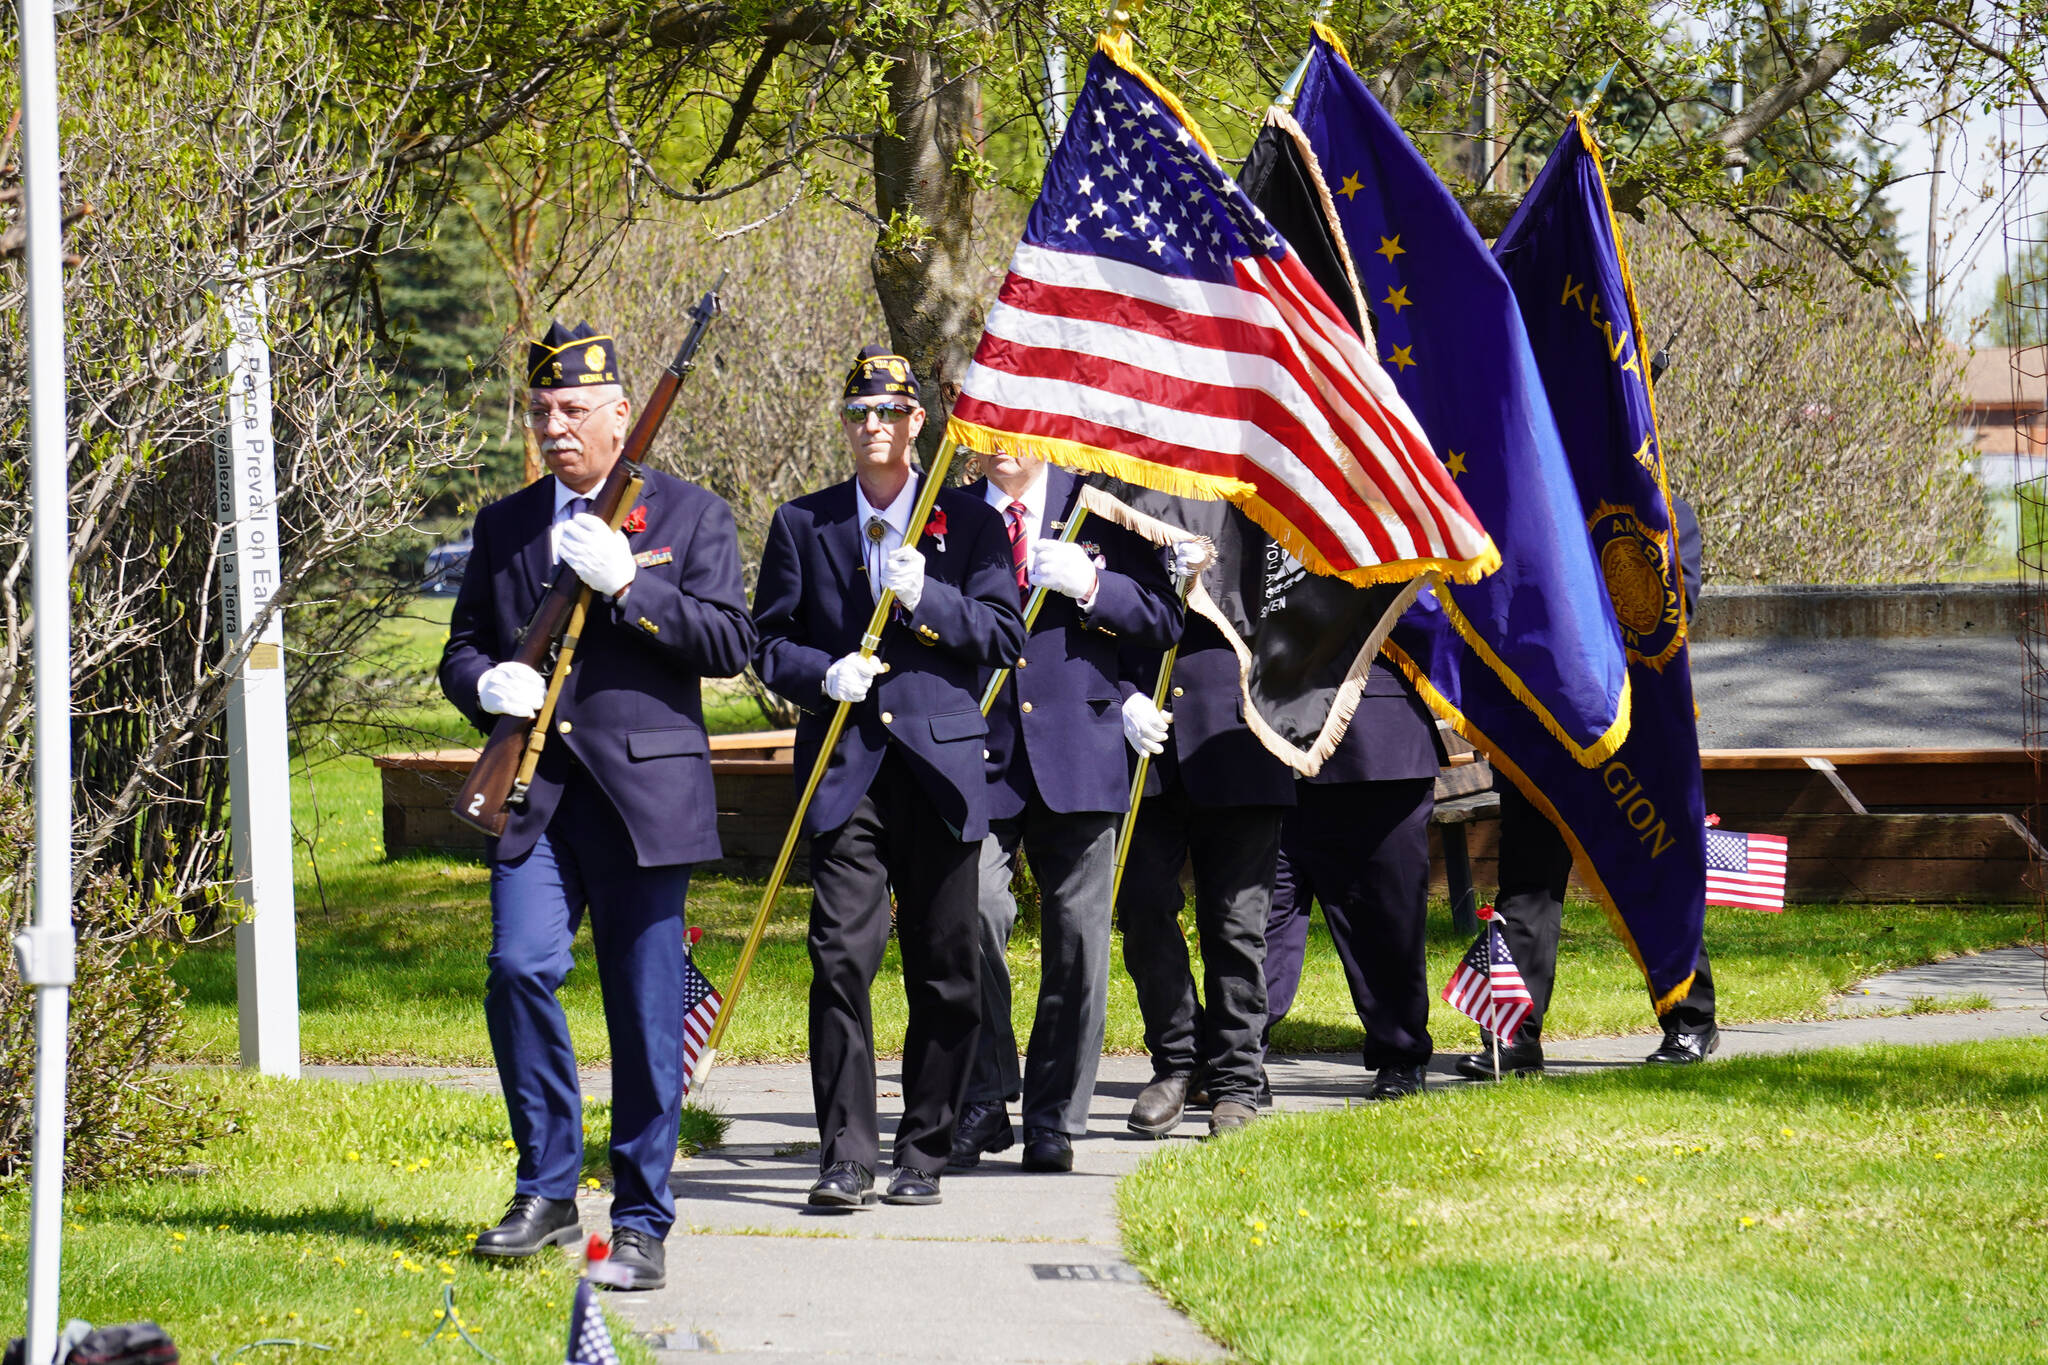 The American Legion Post 20 Color Guard holds a procession during a Memorial Day ceremony on Monday, May 29, 2023, at Leif Hanson Memorial Park in Kenai, Alaska. (Jake Dye/Peninsula Clarion)